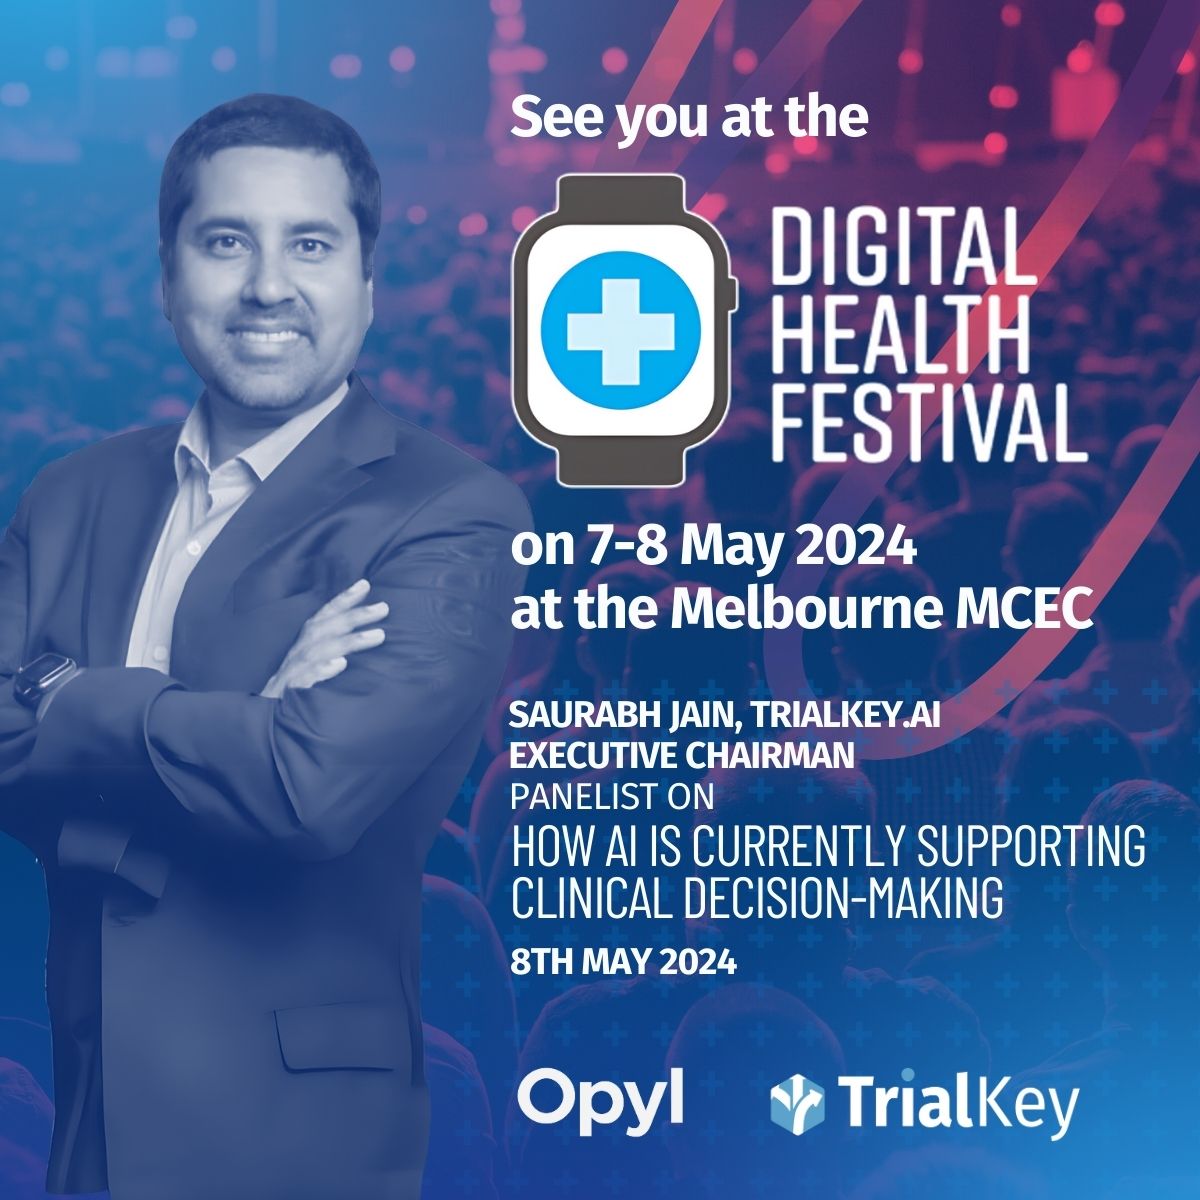 Only 7 days until the @digitalhlthfest 2024! Don't forget to mark your calendars and swing by booth to discover the latest innovations in digital health. See you on 7-8 May at the Melbourne MCEC! #DHF2024 #trialkeyai #opylai